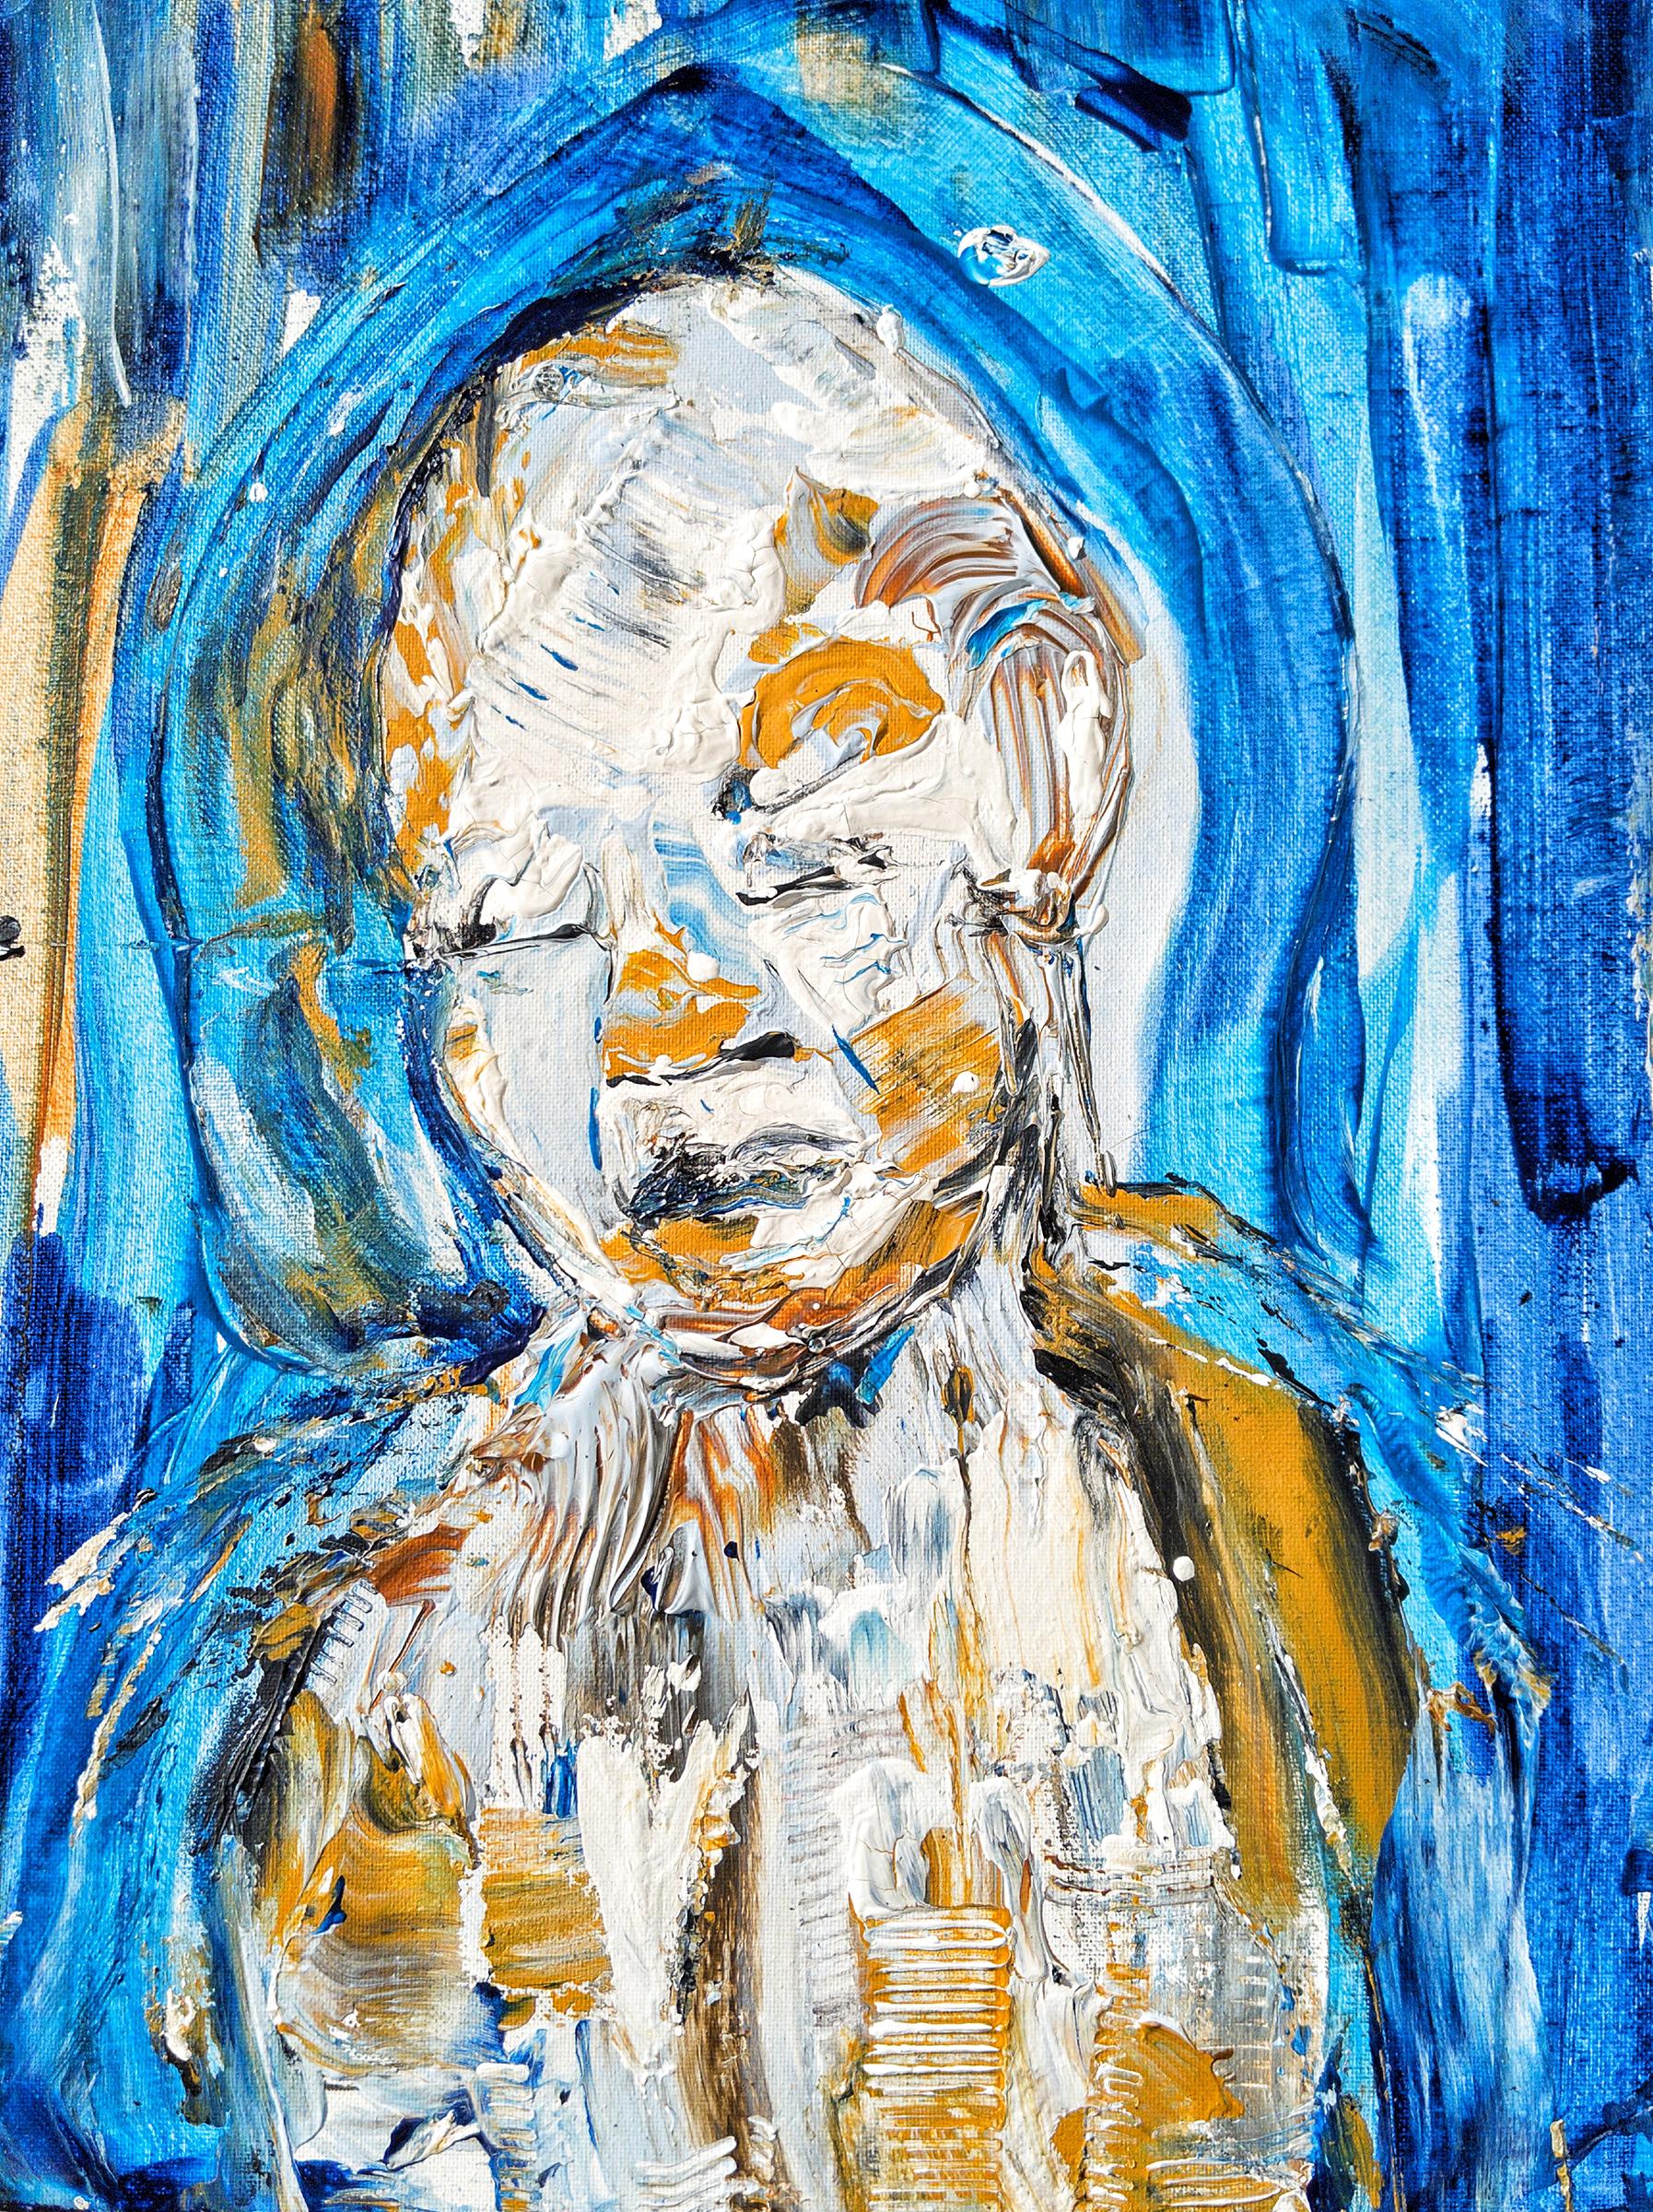 'My Blue Peace' - contemporary abstract portrait - expressionism - Ed Clark - Mixed Media Art by Sachi Rome